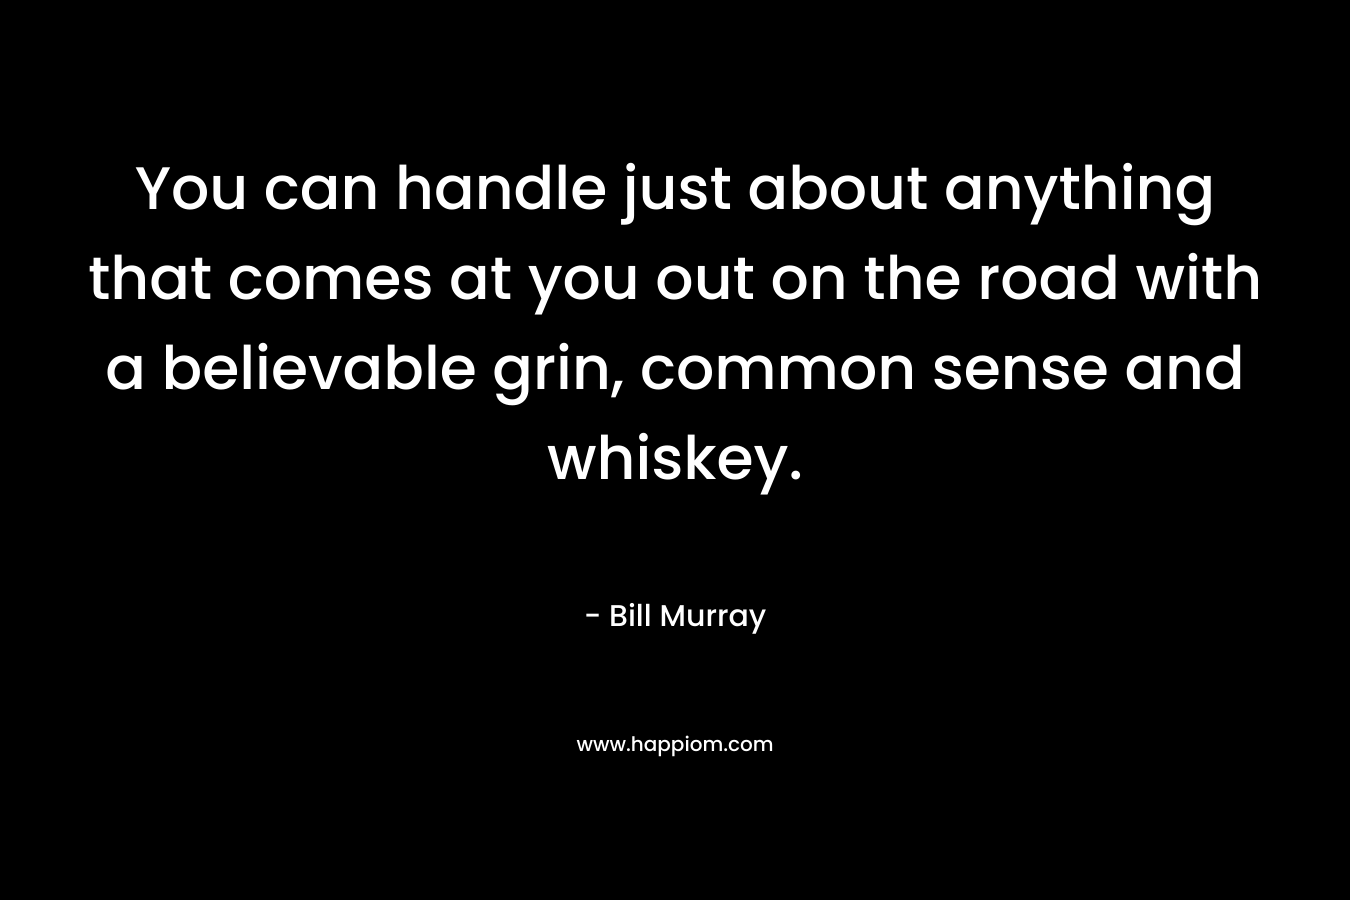 You can handle just about anything that comes at you out on the road with a believable grin, common sense and whiskey. – Bill  Murray